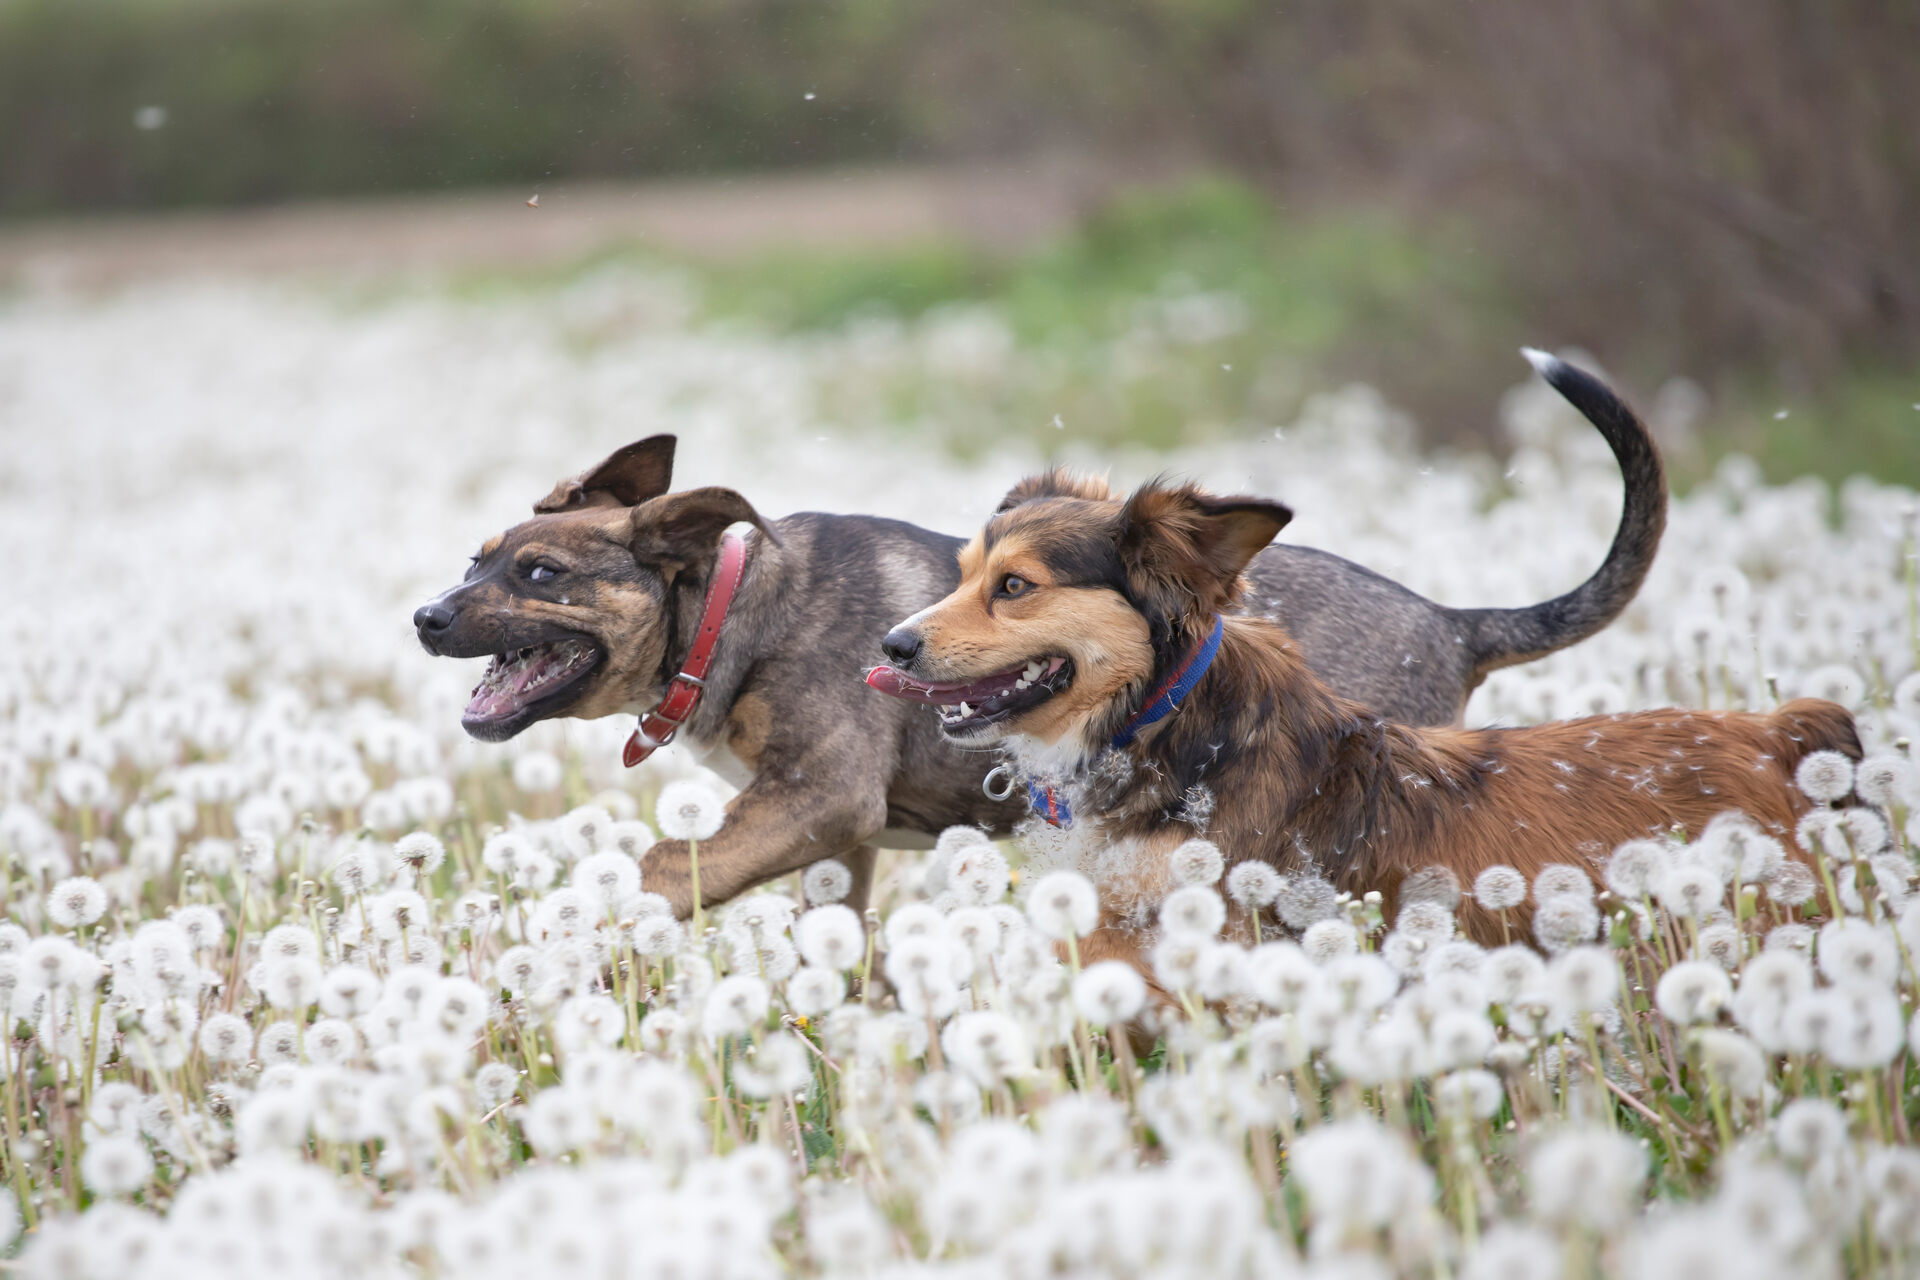 Two dogs running through a meadow full of dandelions